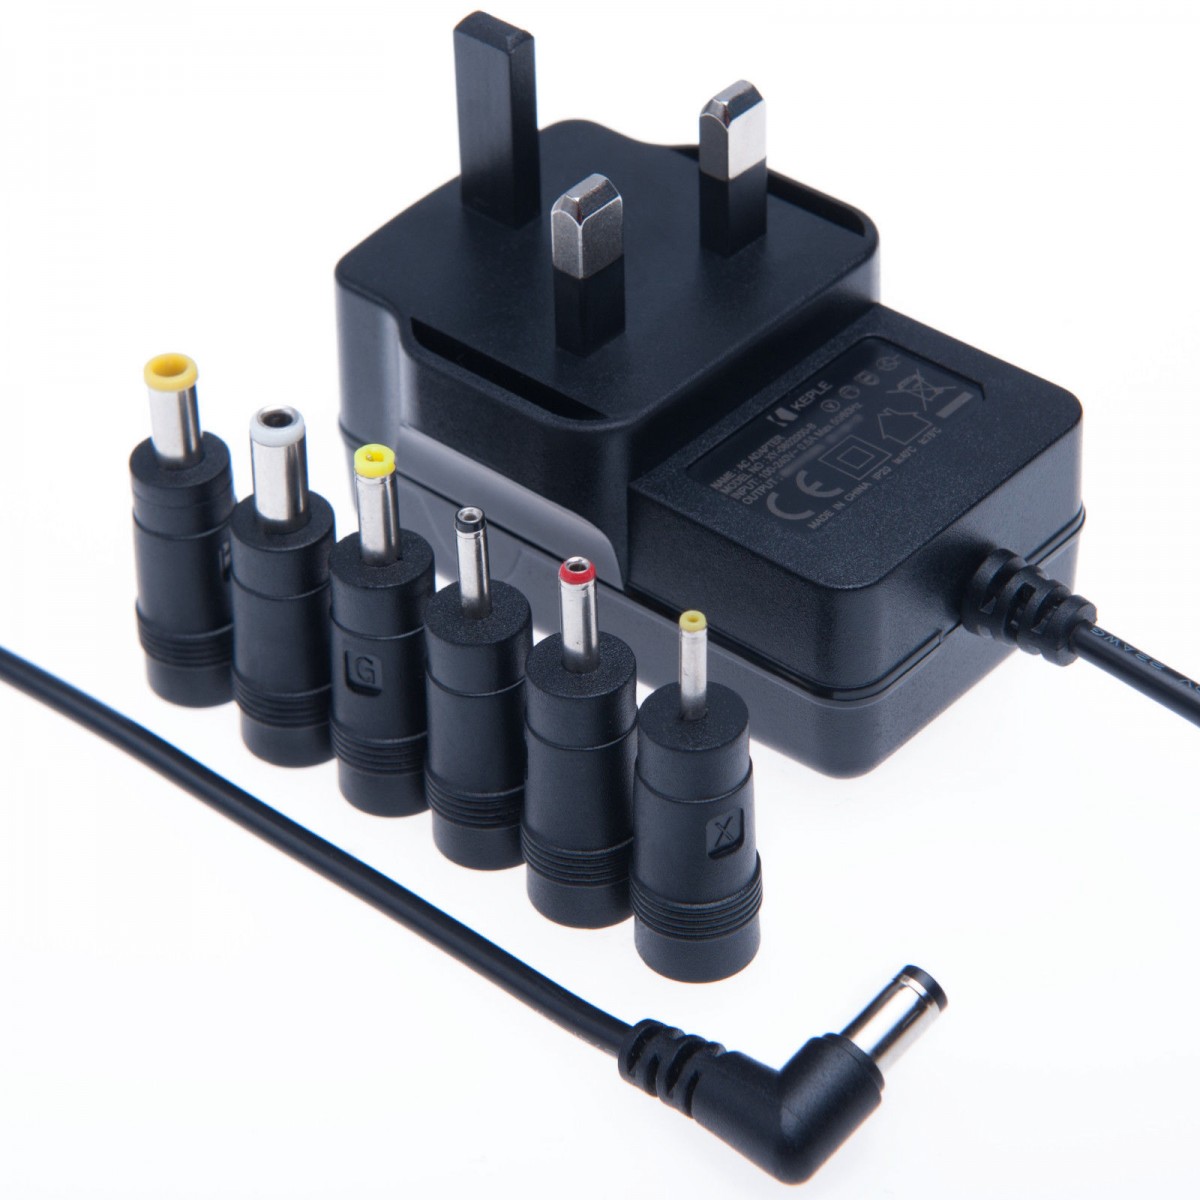 What Is A Power Adapter Used For